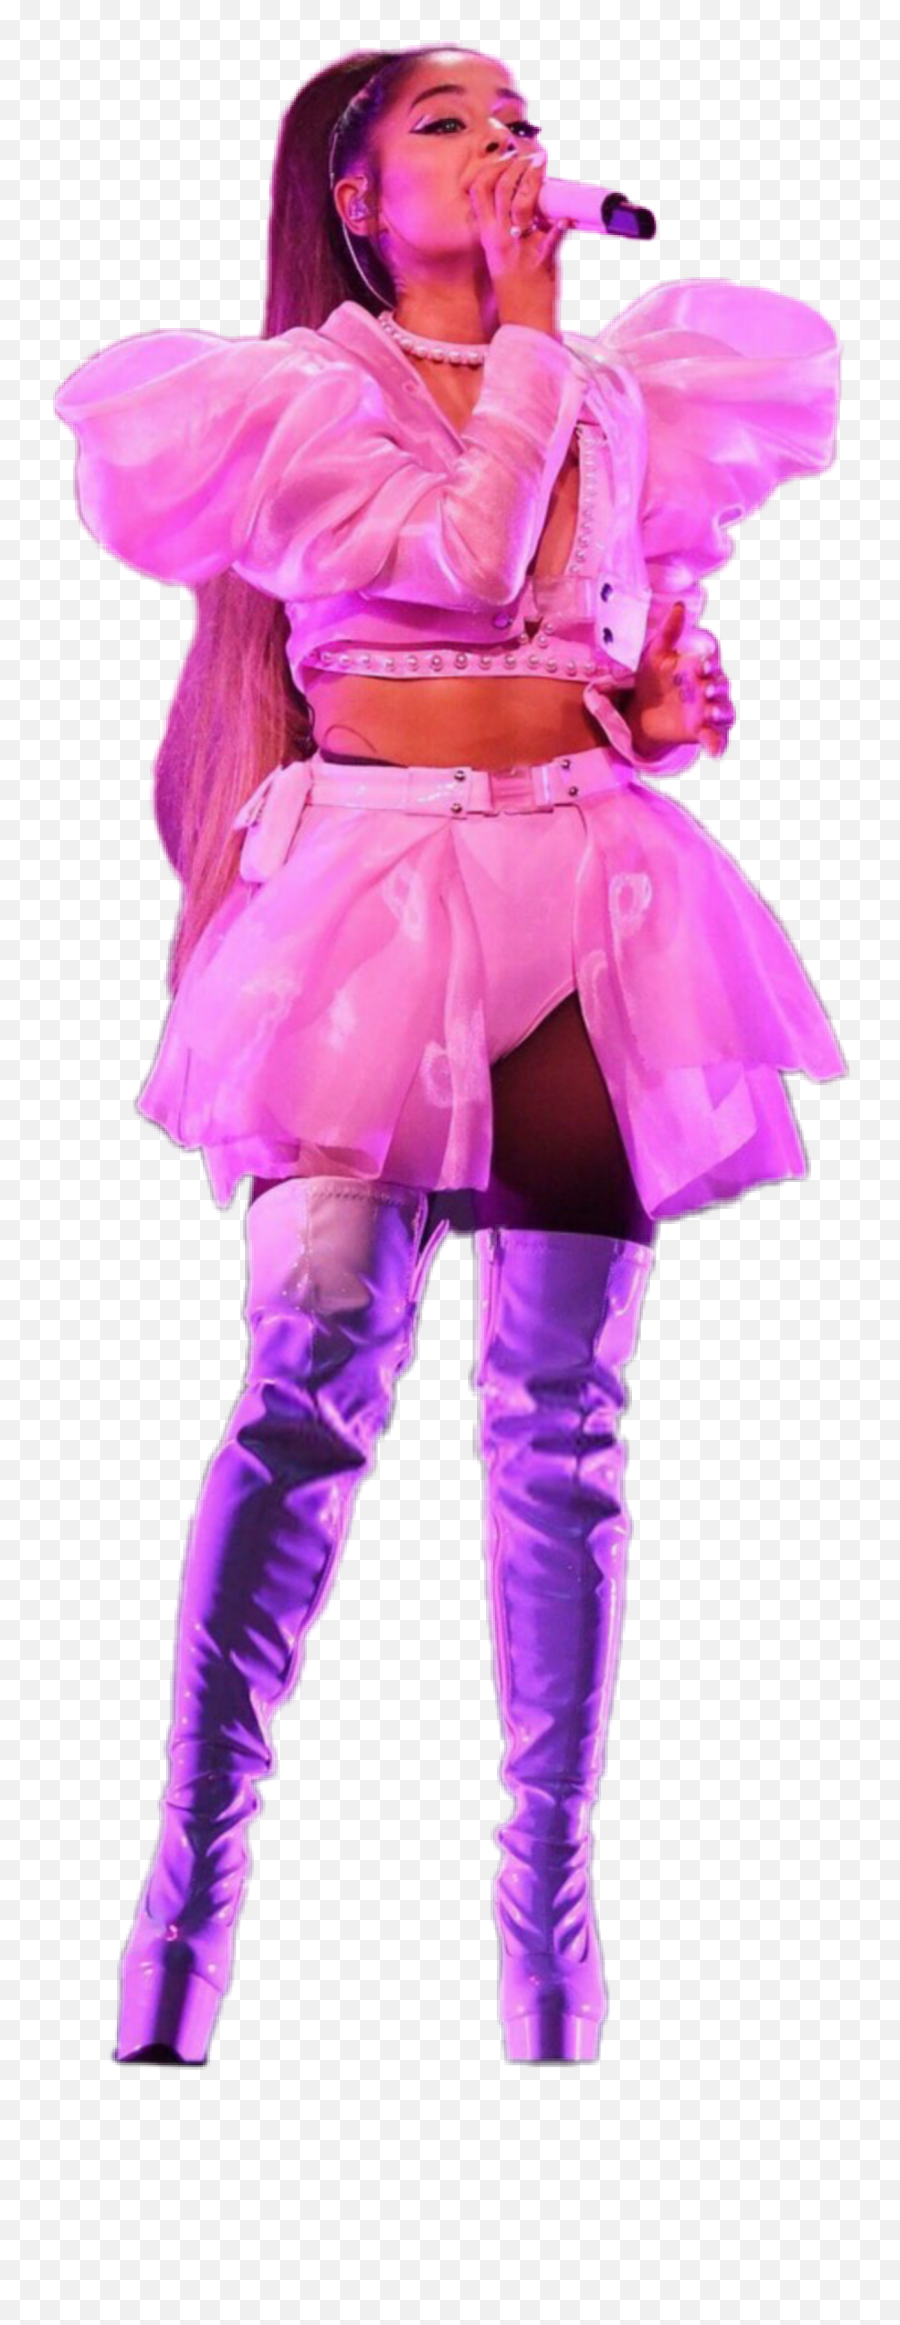 Arianagrande Ariana Grande Sticker By Dangerous Woman - Ariana Grande Sweetener World Tour Pink Outfits Png,Ariana Grande Transparent